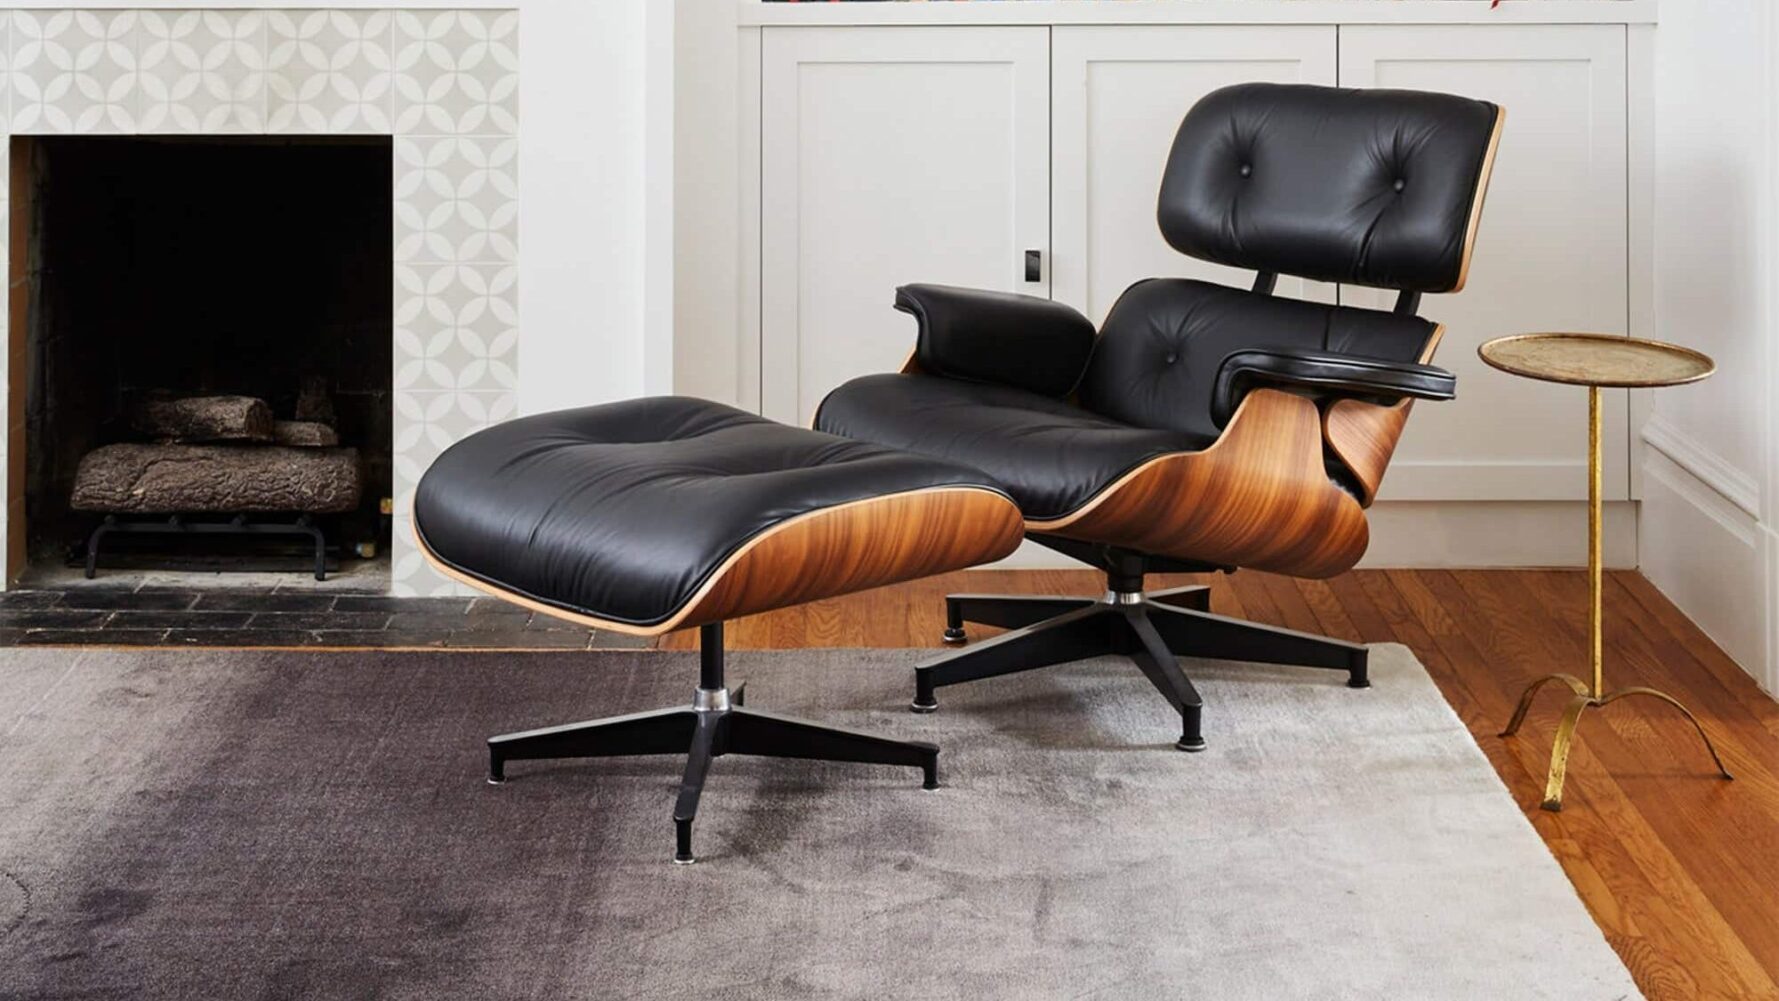 ClassicLoungeChair TallBlackPalisander 15 edited scaled